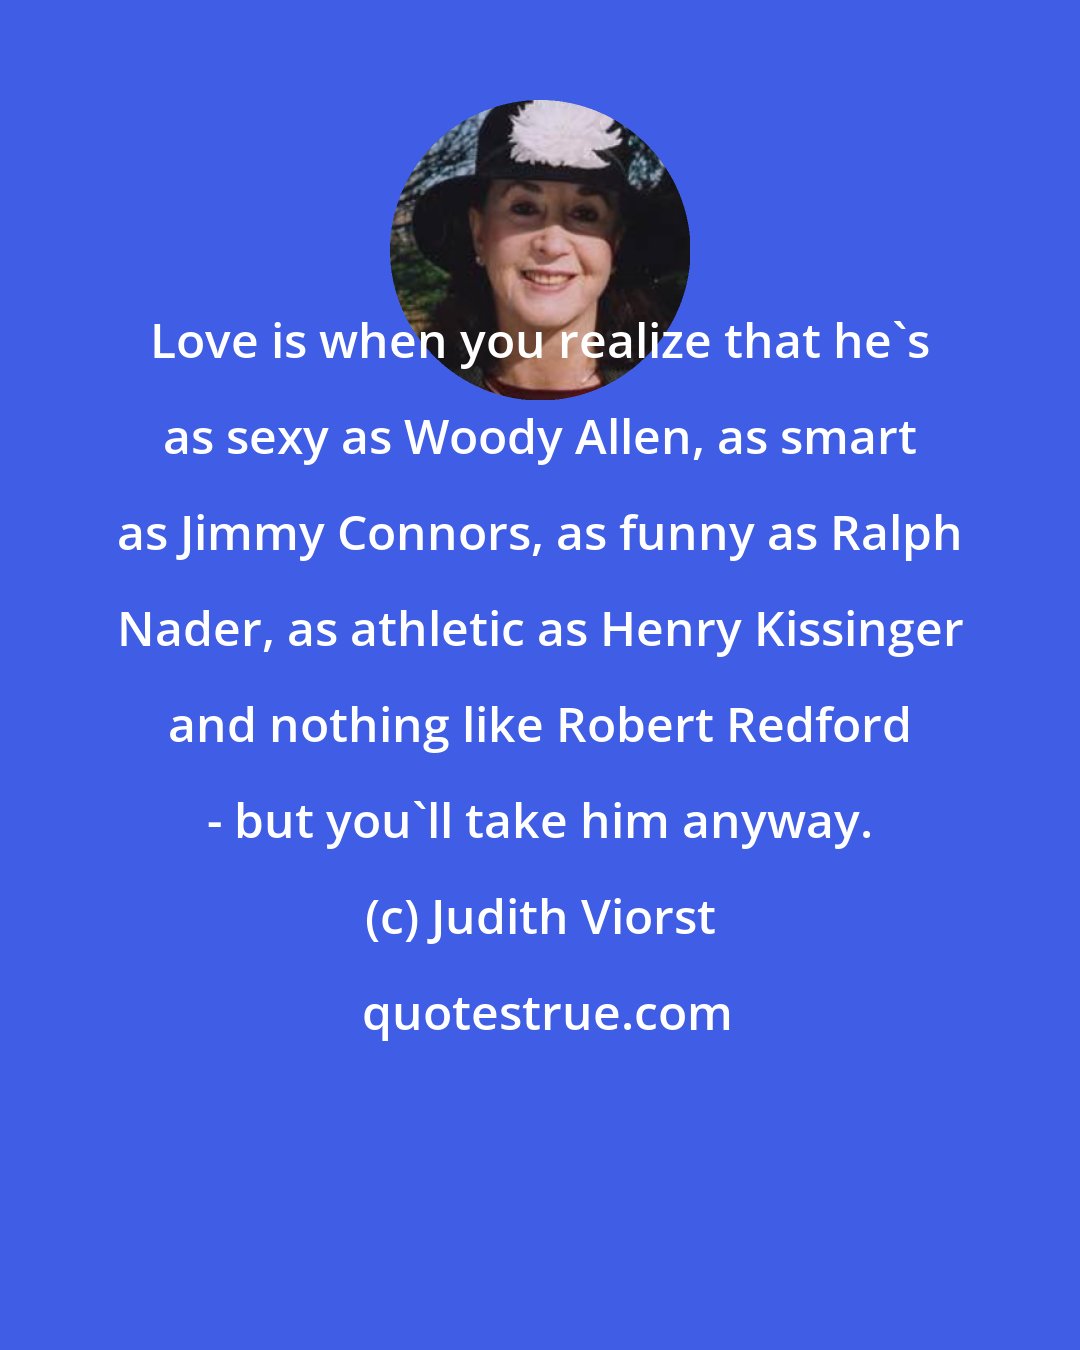 Judith Viorst: Love is when you realize that he's as sexy as Woody Allen, as smart as Jimmy Connors, as funny as Ralph Nader, as athletic as Henry Kissinger and nothing like Robert Redford - but you'll take him anyway.